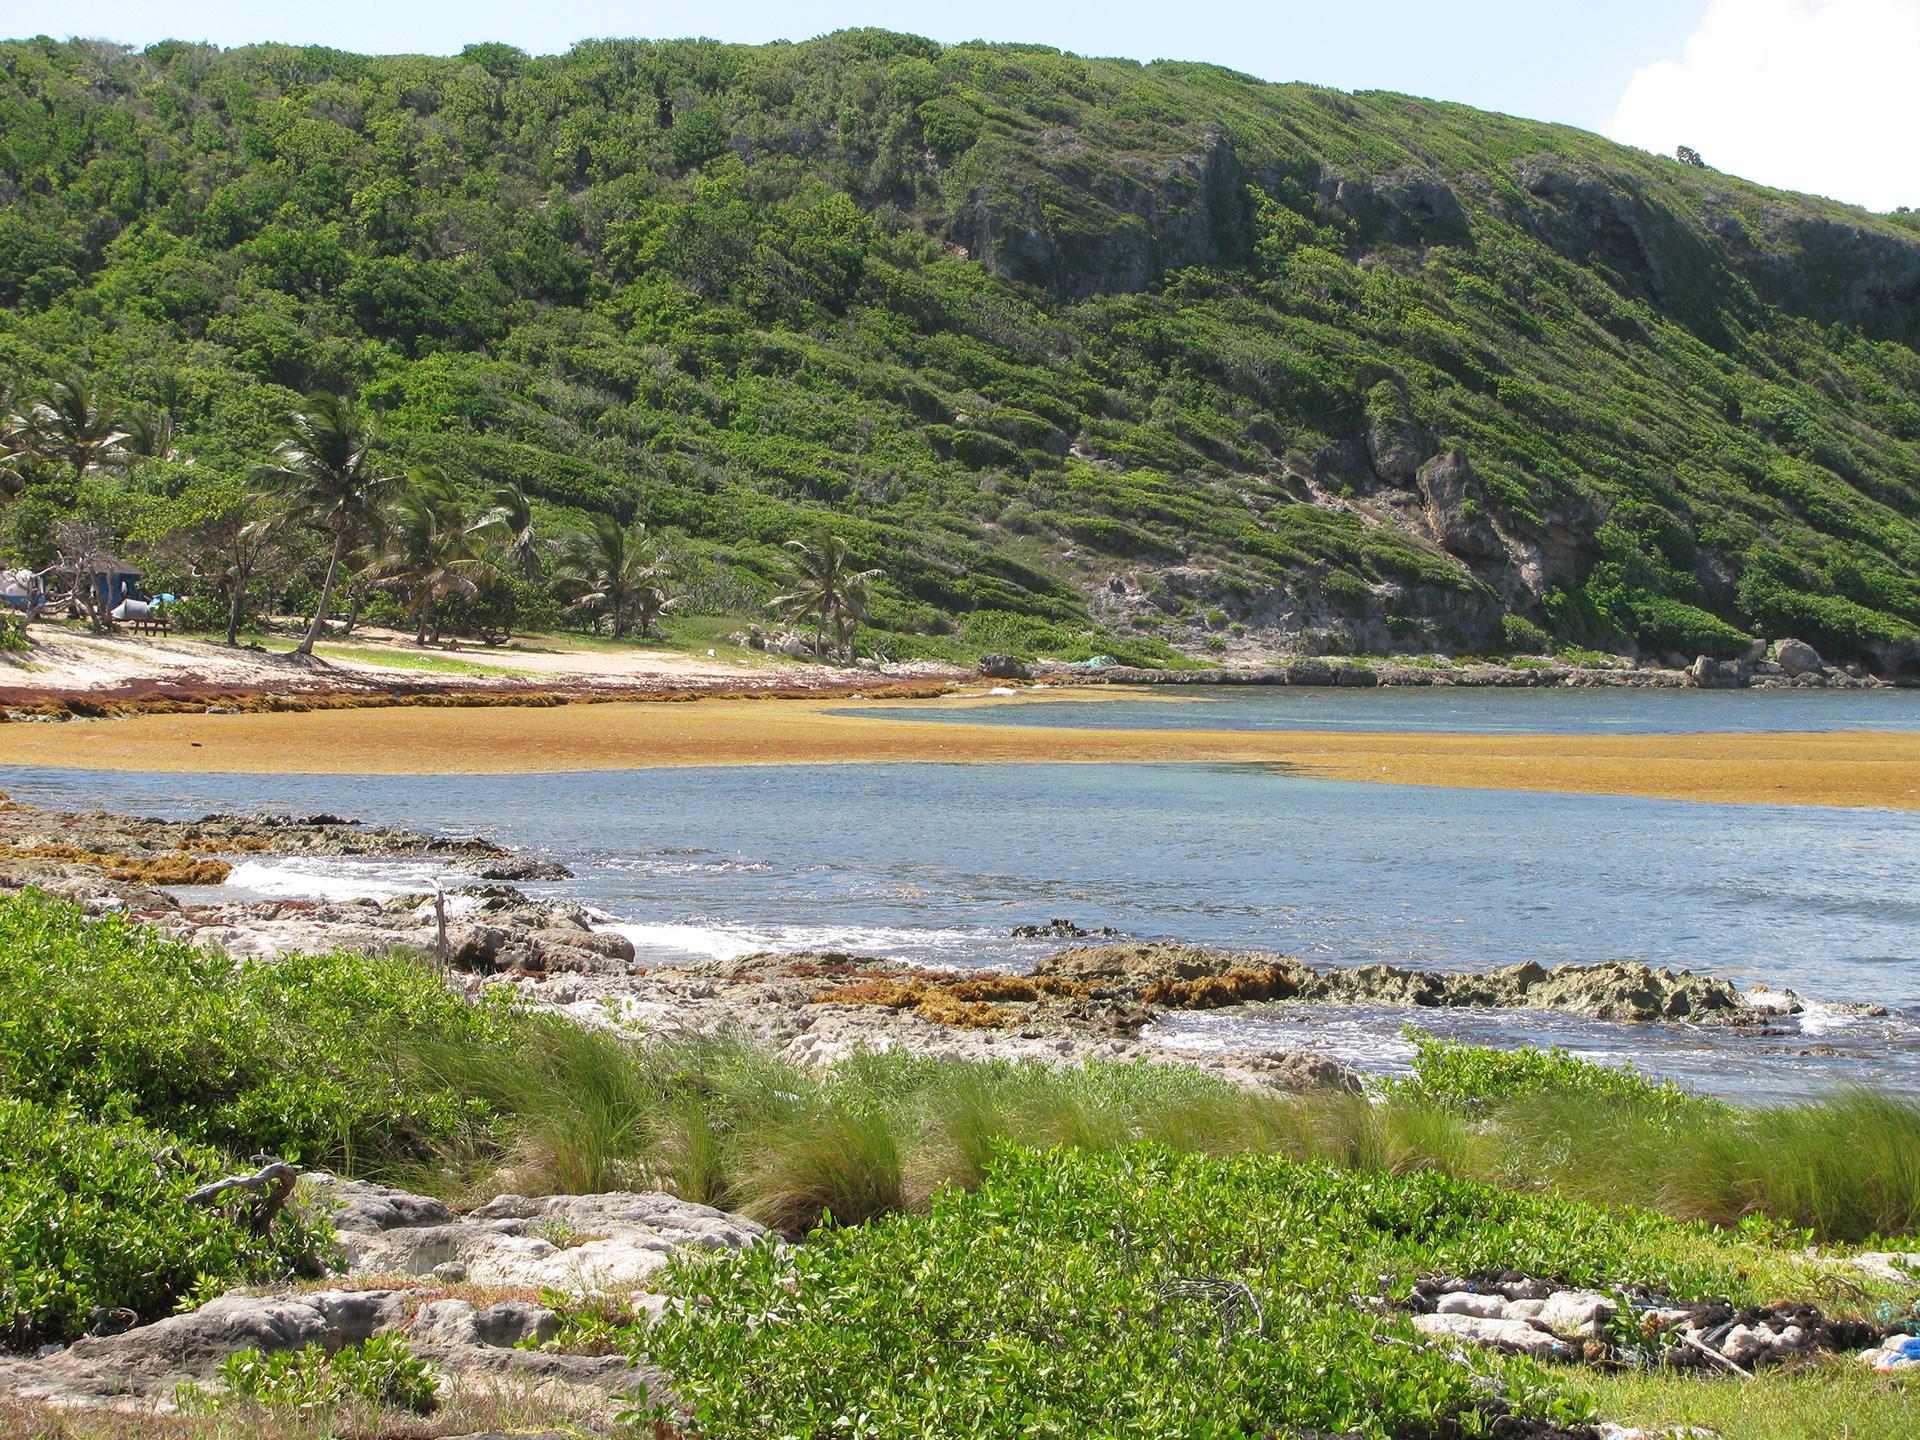 Arrival of the Sargassum, Guadeloupe